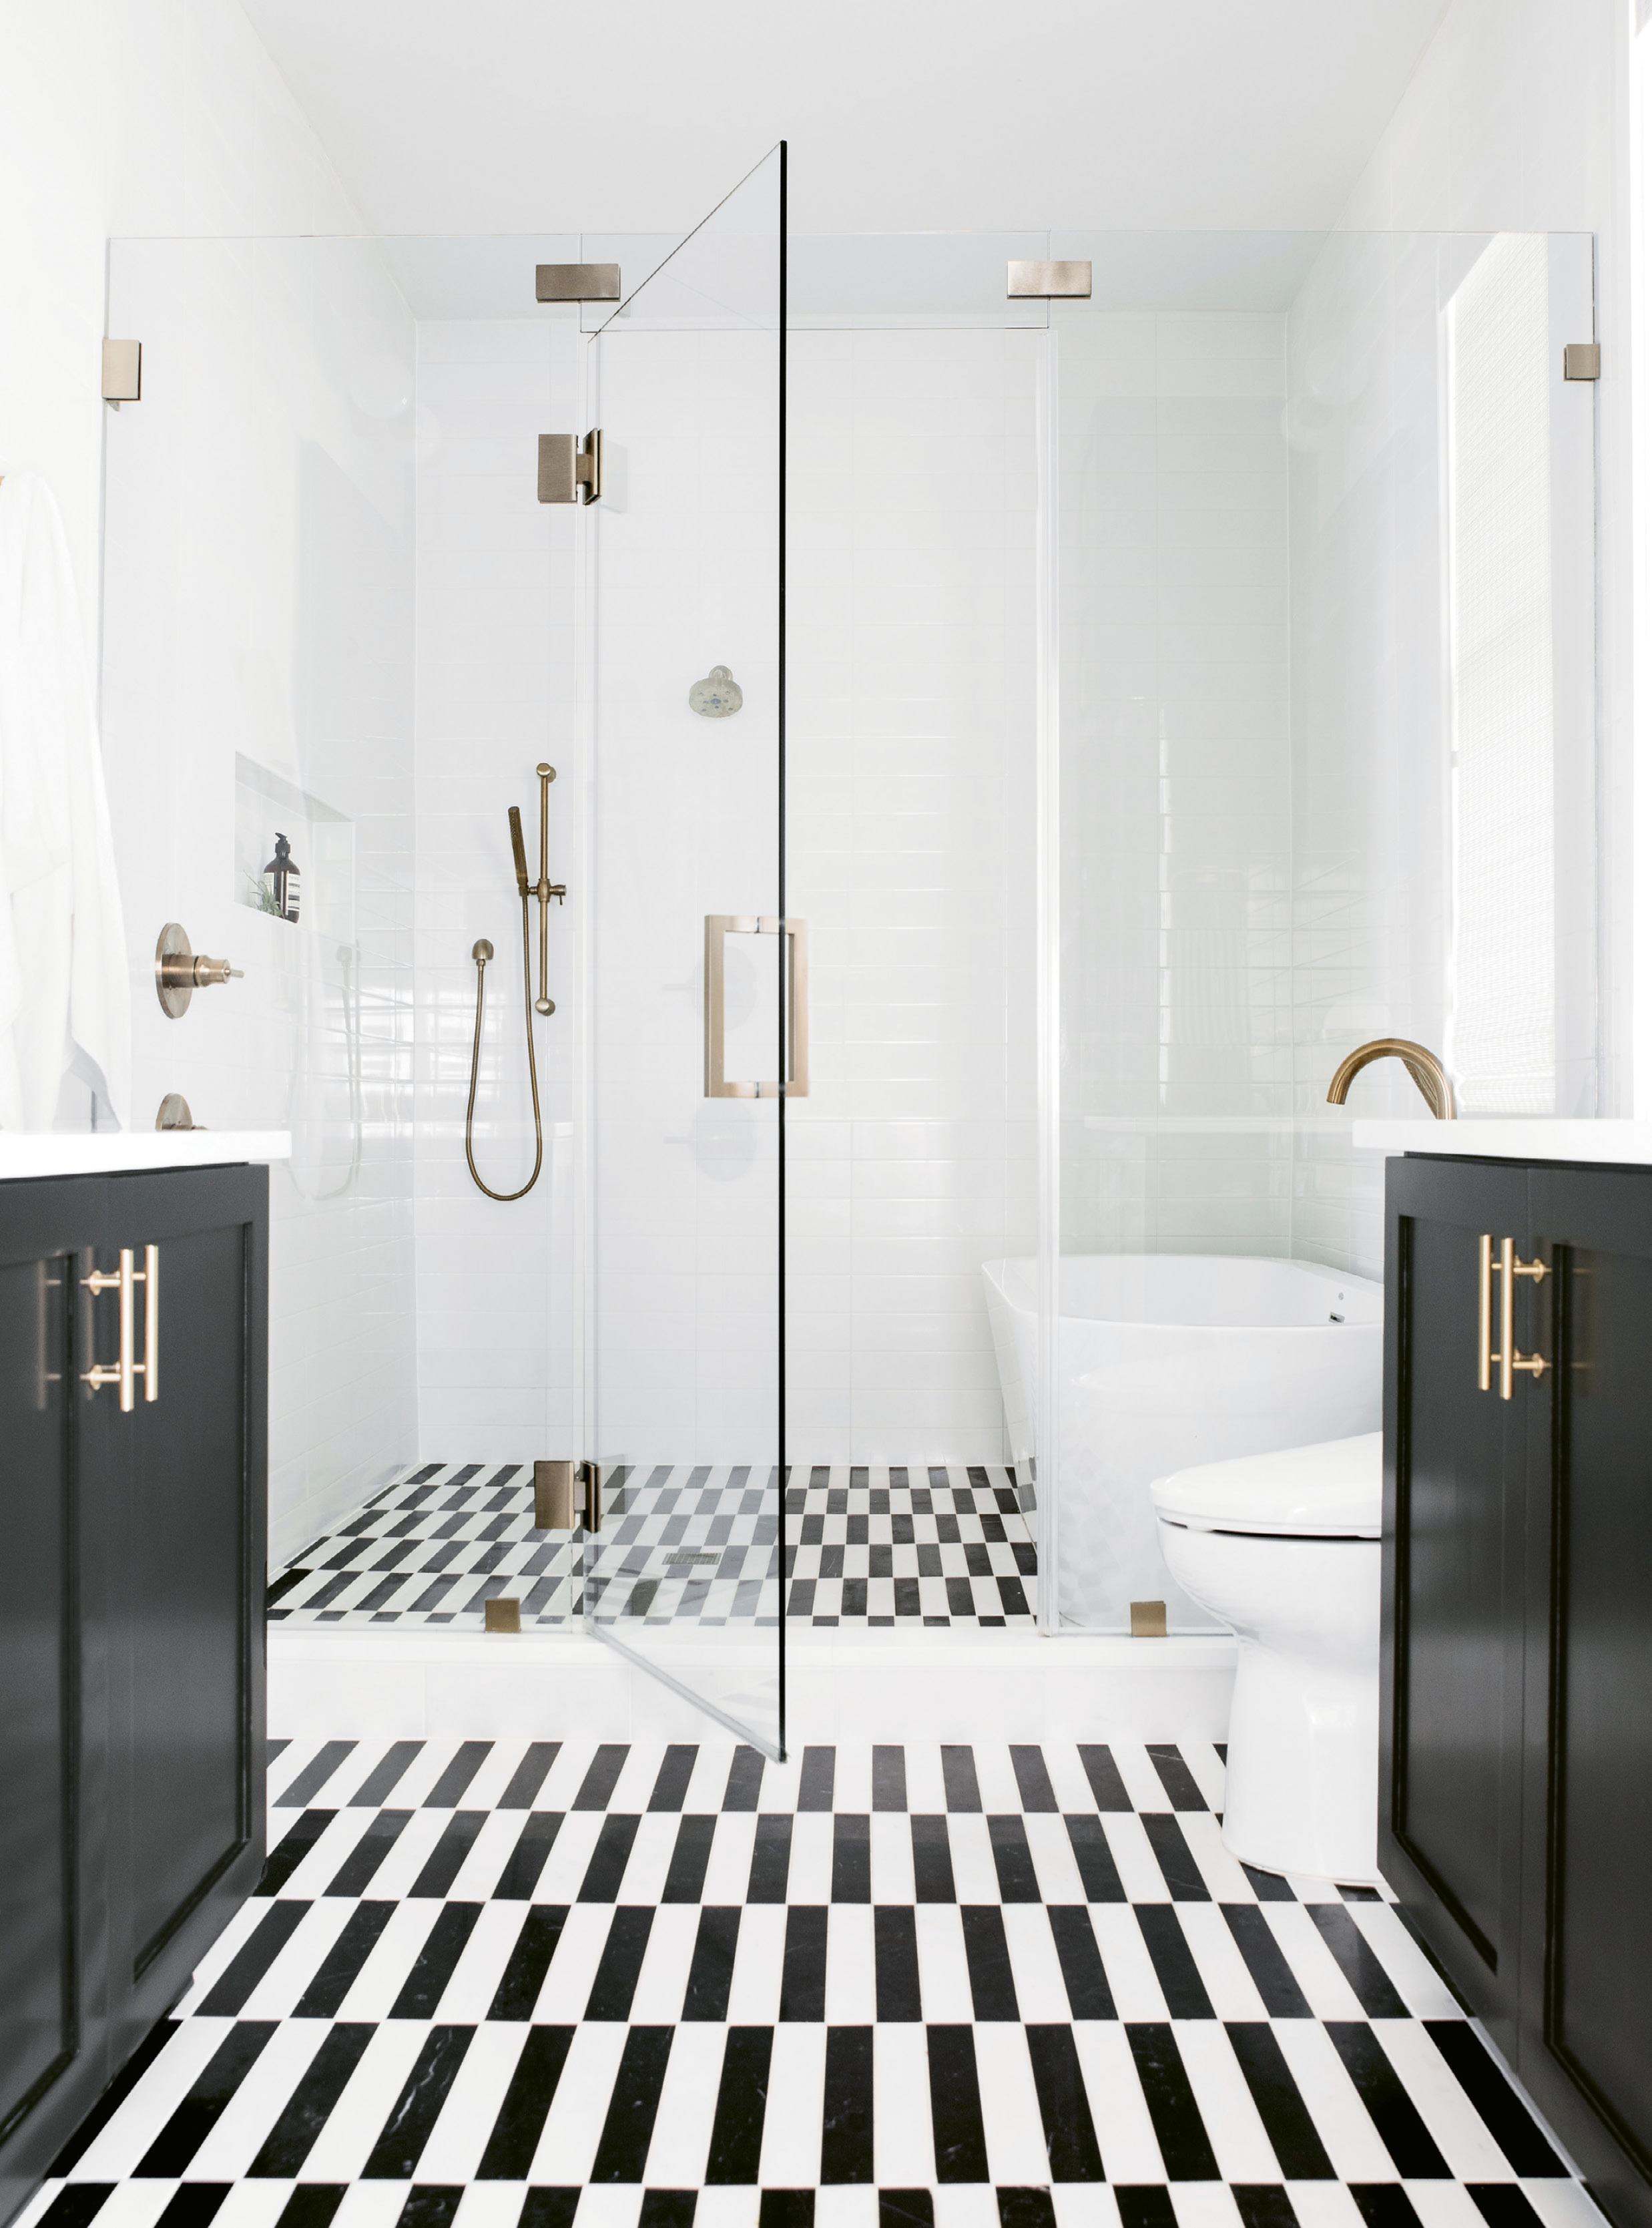 CLEAN &amp; SERENE: The master suite rivals boutique hotels for its comfort and style. A space-saving “wet room” configuration in the bath fits a walk-in shower and soaking tub, while glistening white-tile walls, cabinets covered in Benjamin Moore’s “Black Beauty,” and a custom-cut marble tile floor add drama.